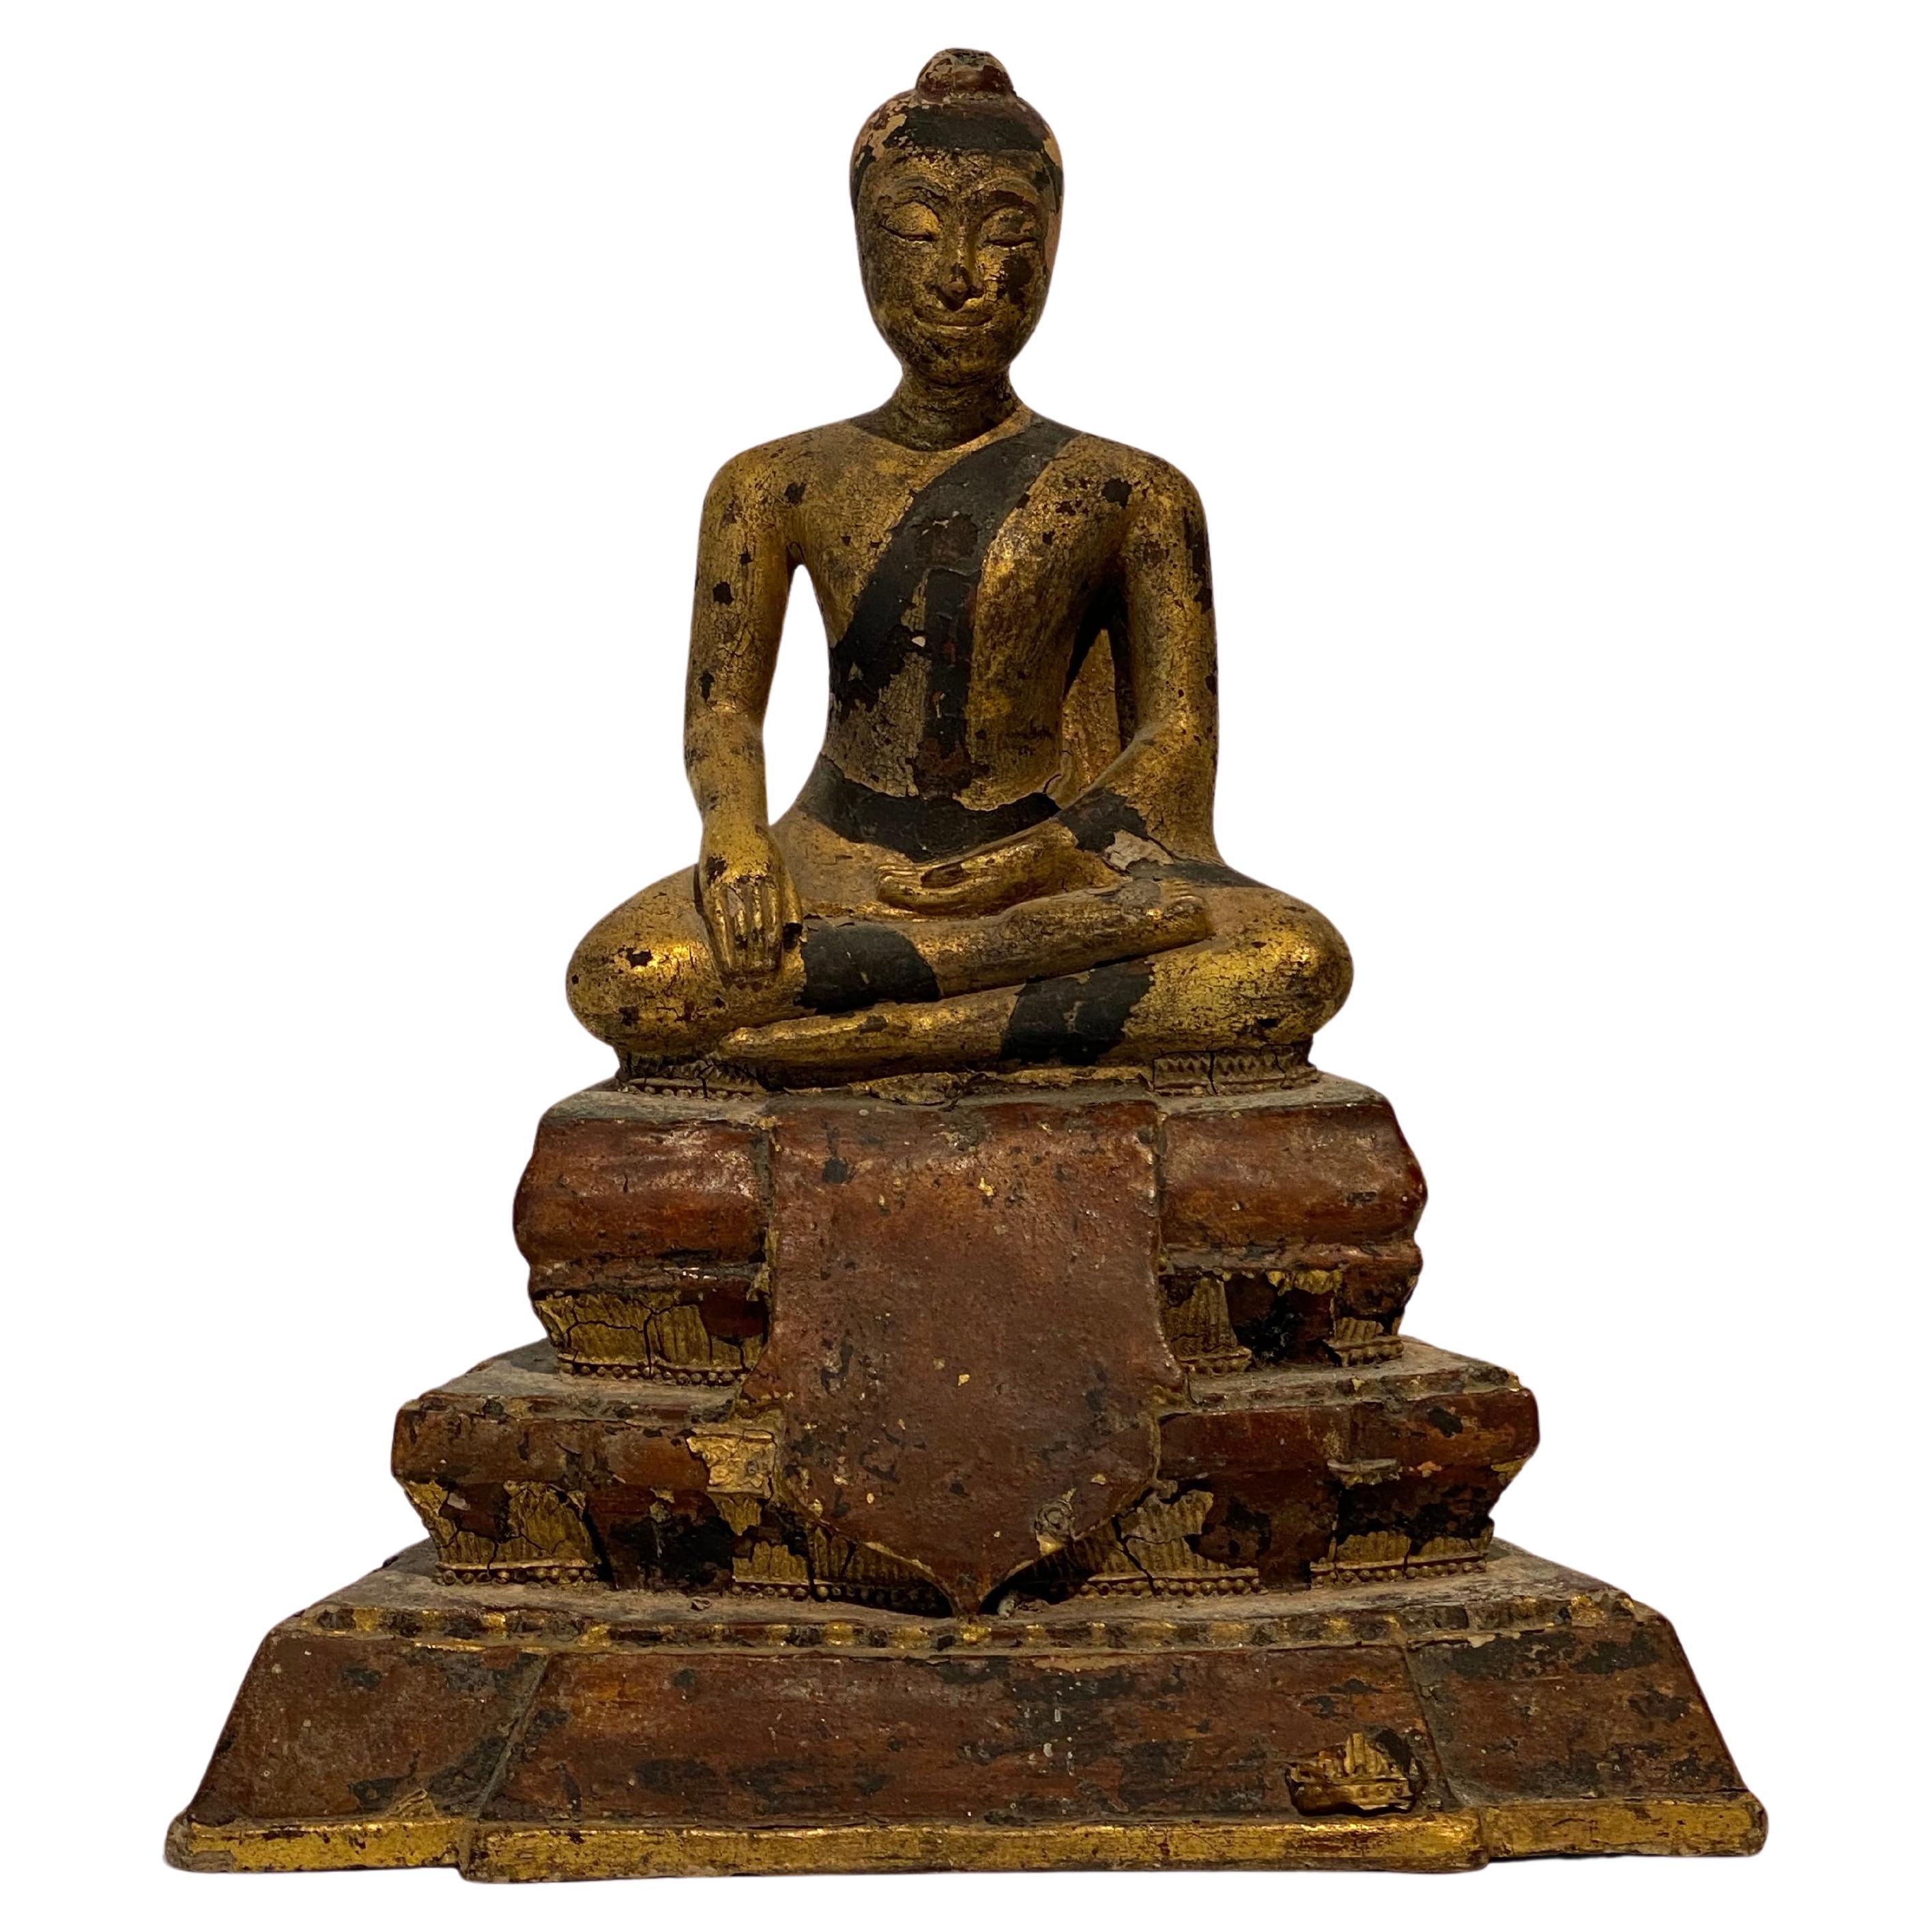 Antique South East Asian Sculpture Of Buddha